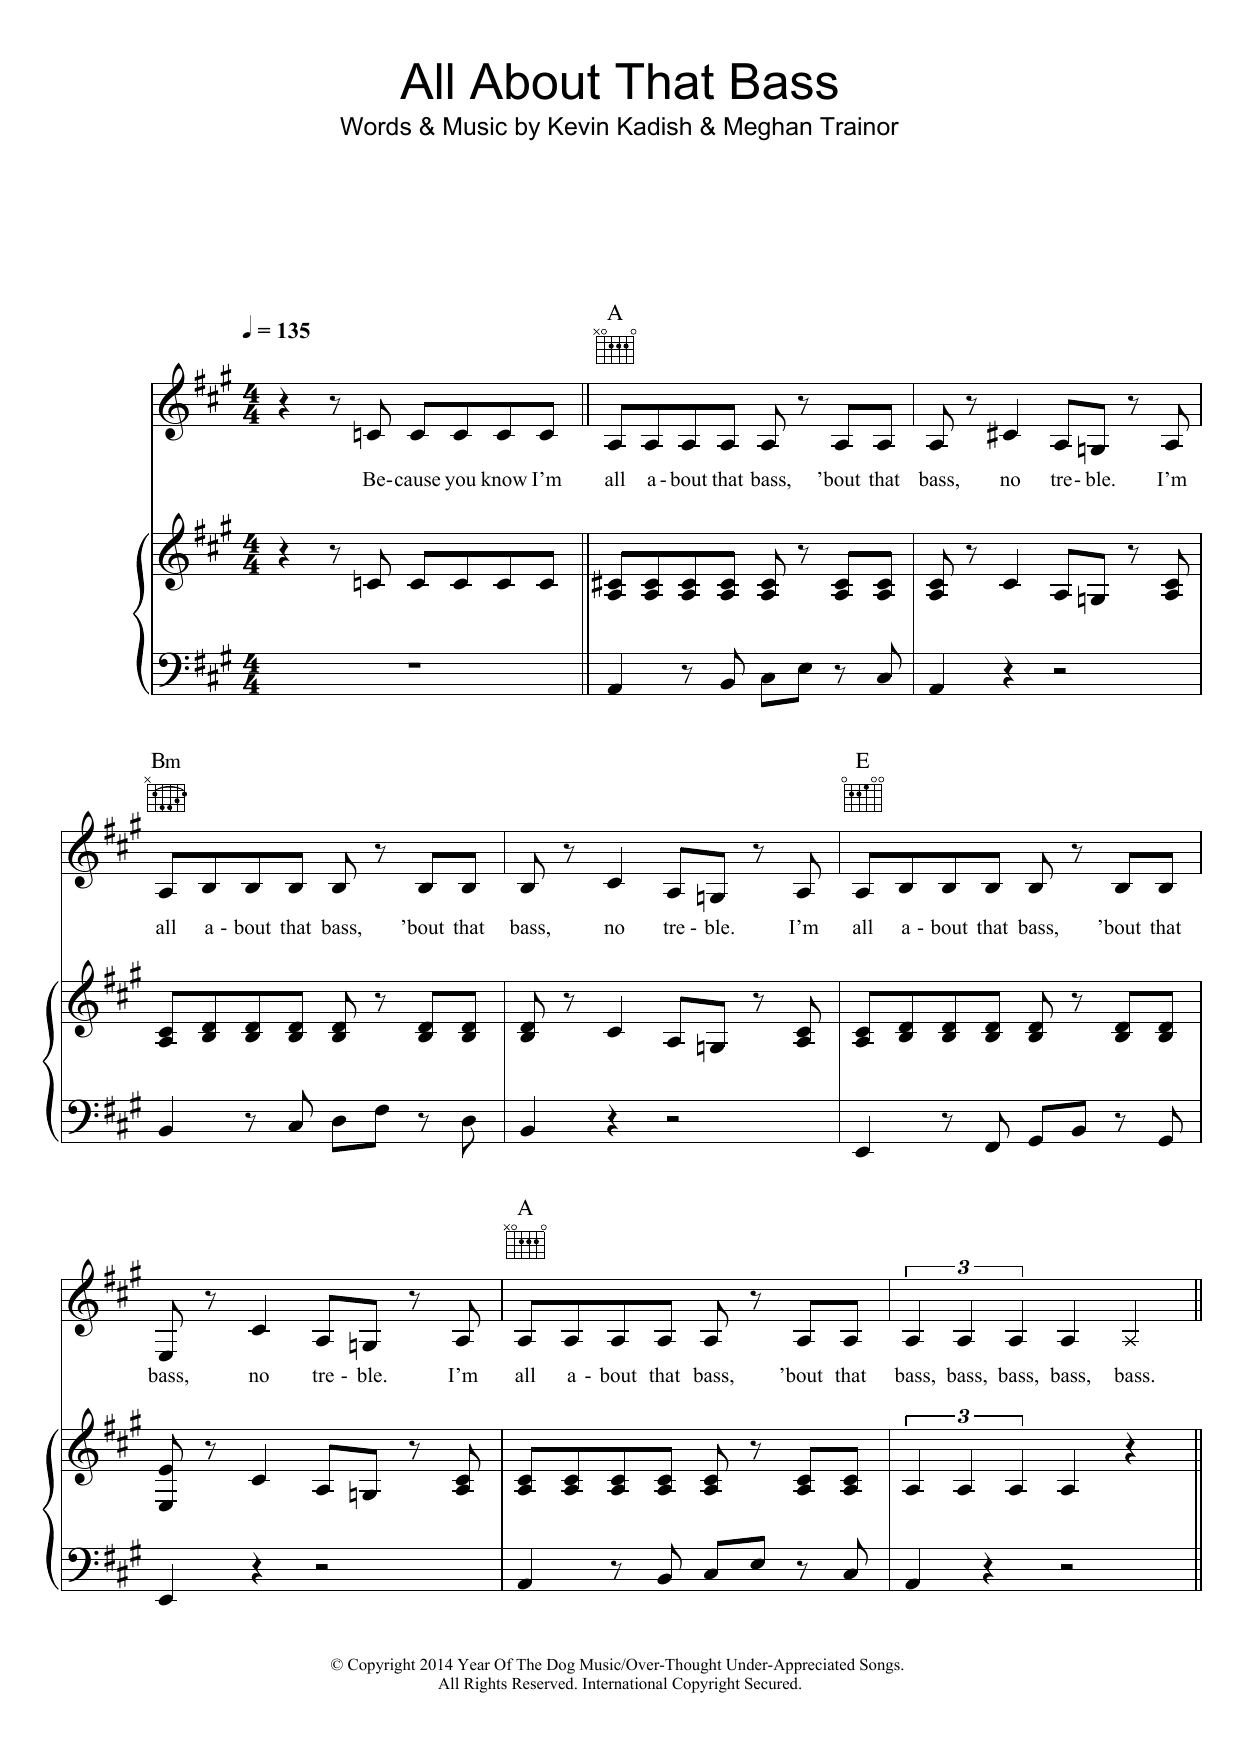 Meghan Trainor All About That Bass sheet music notes and chords. Download Printable PDF.